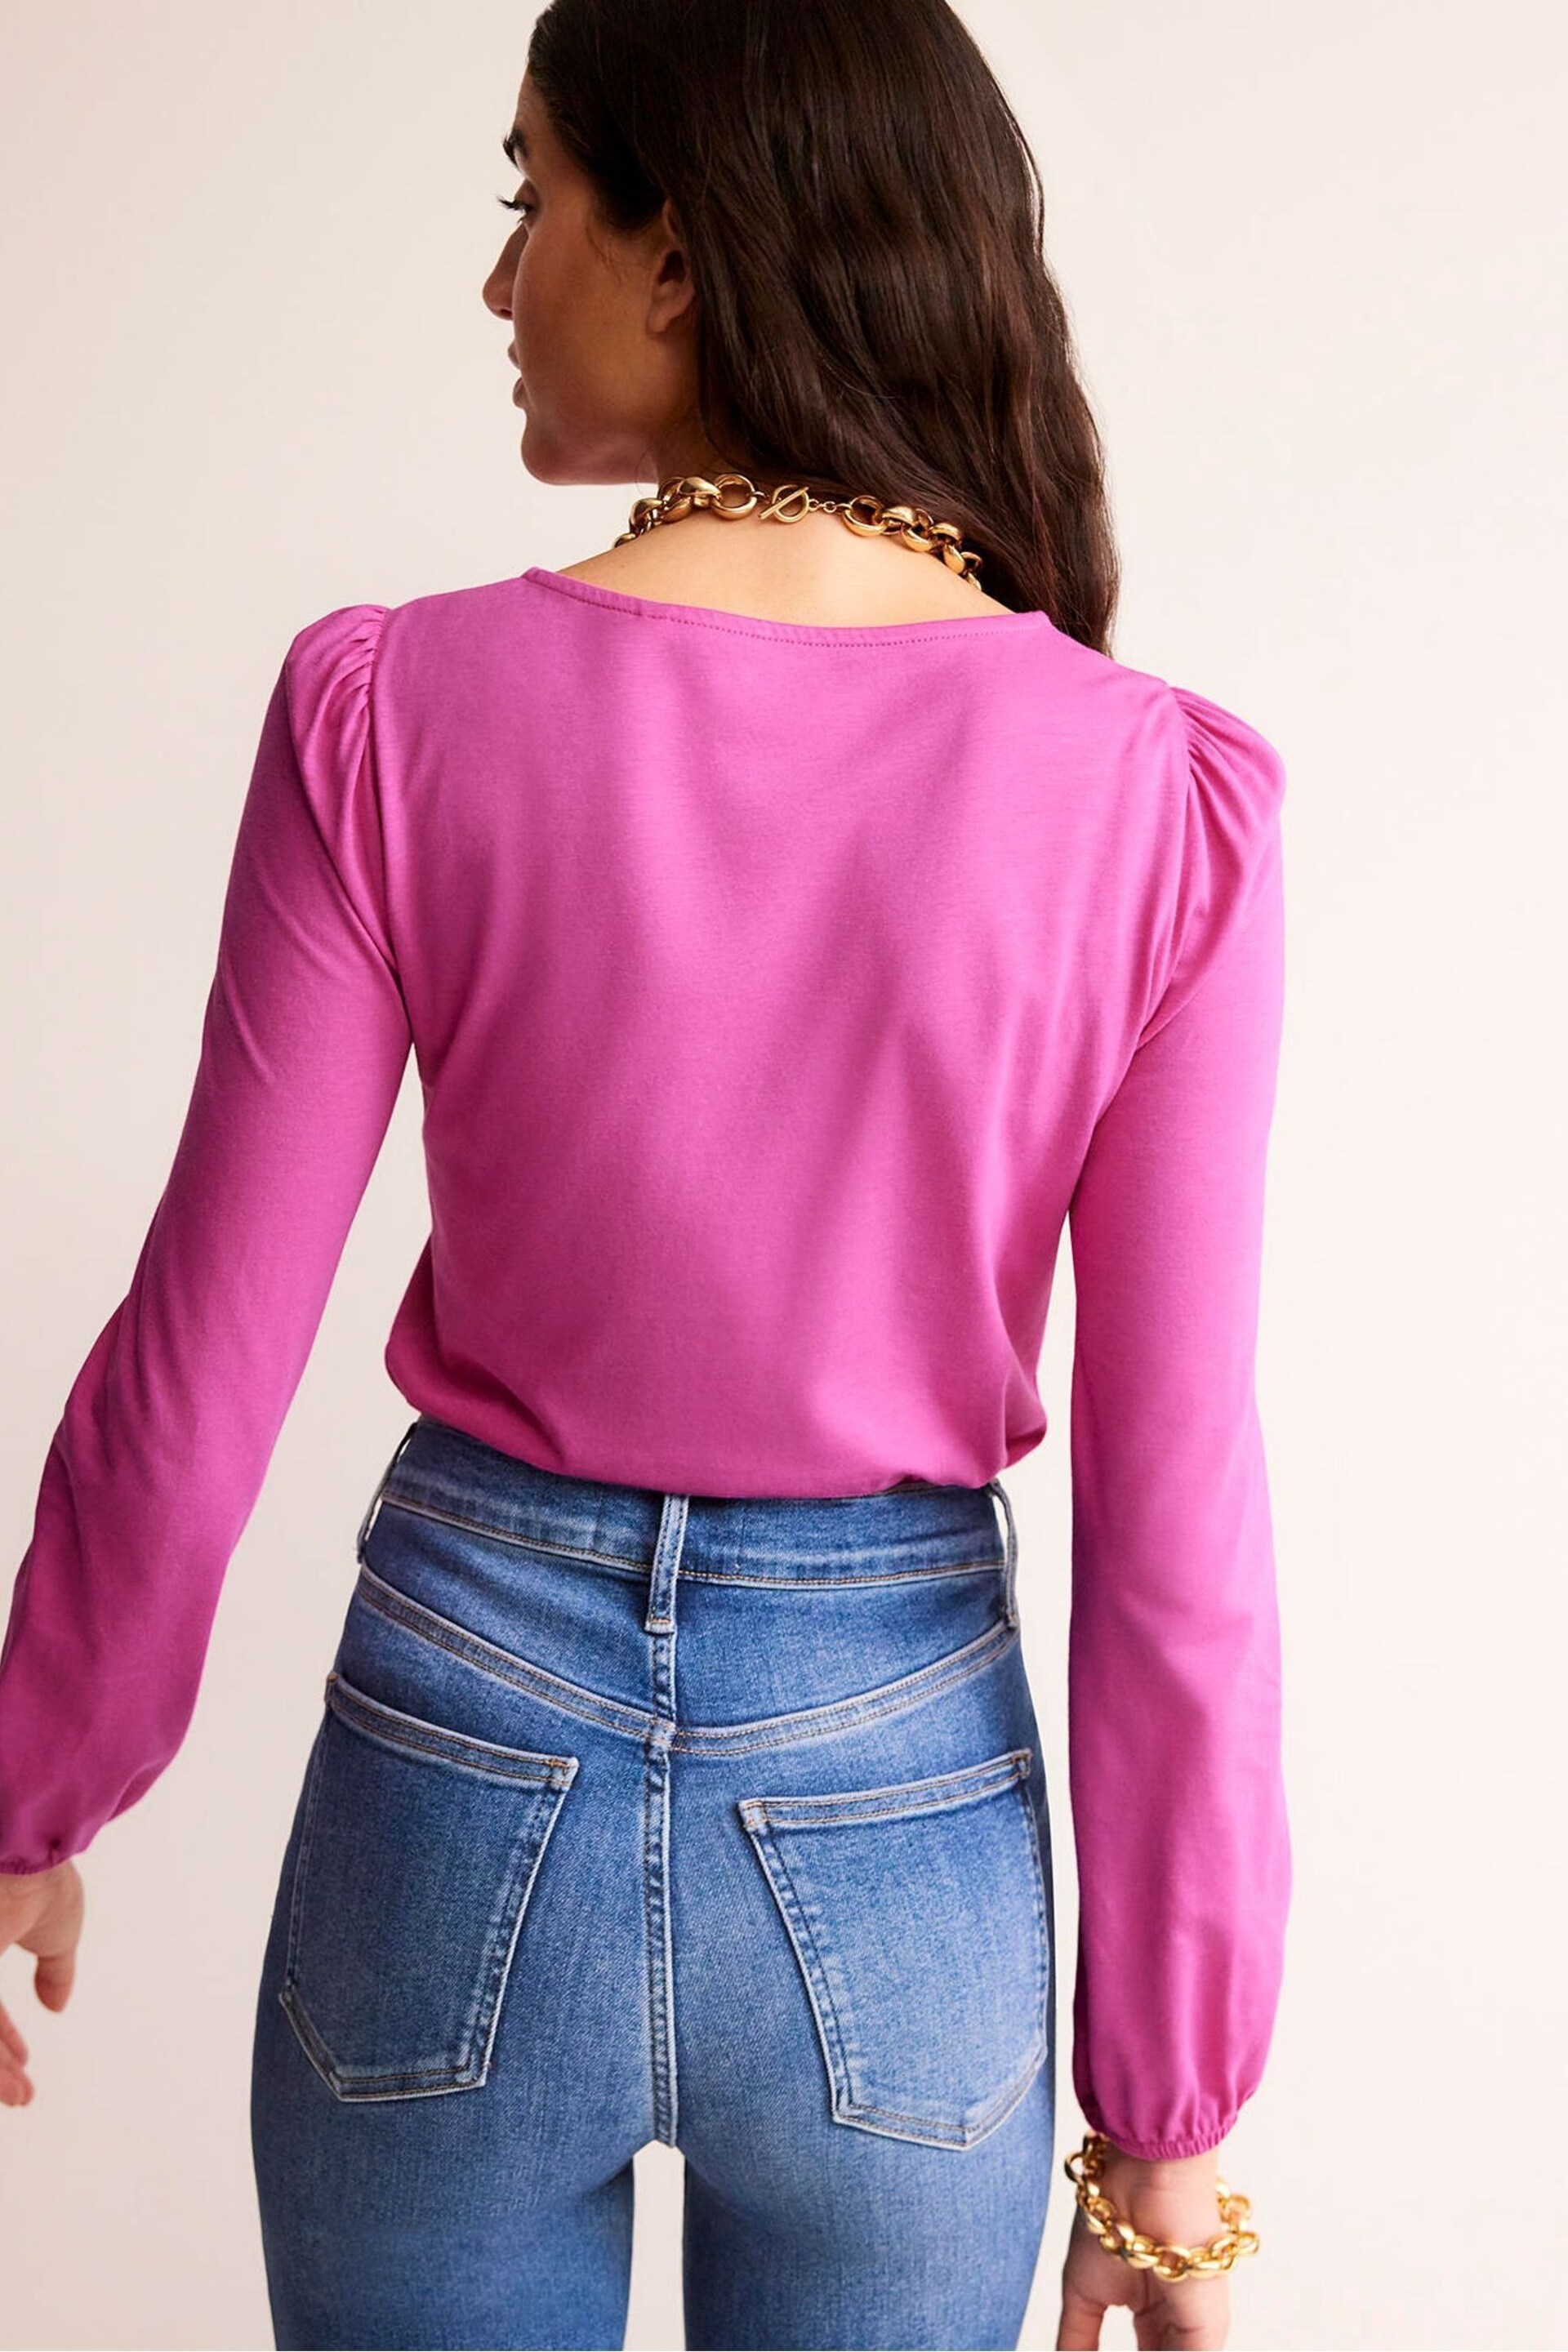 Boden Pink Supersoft Long Sleeve Top - Image 2 of 5